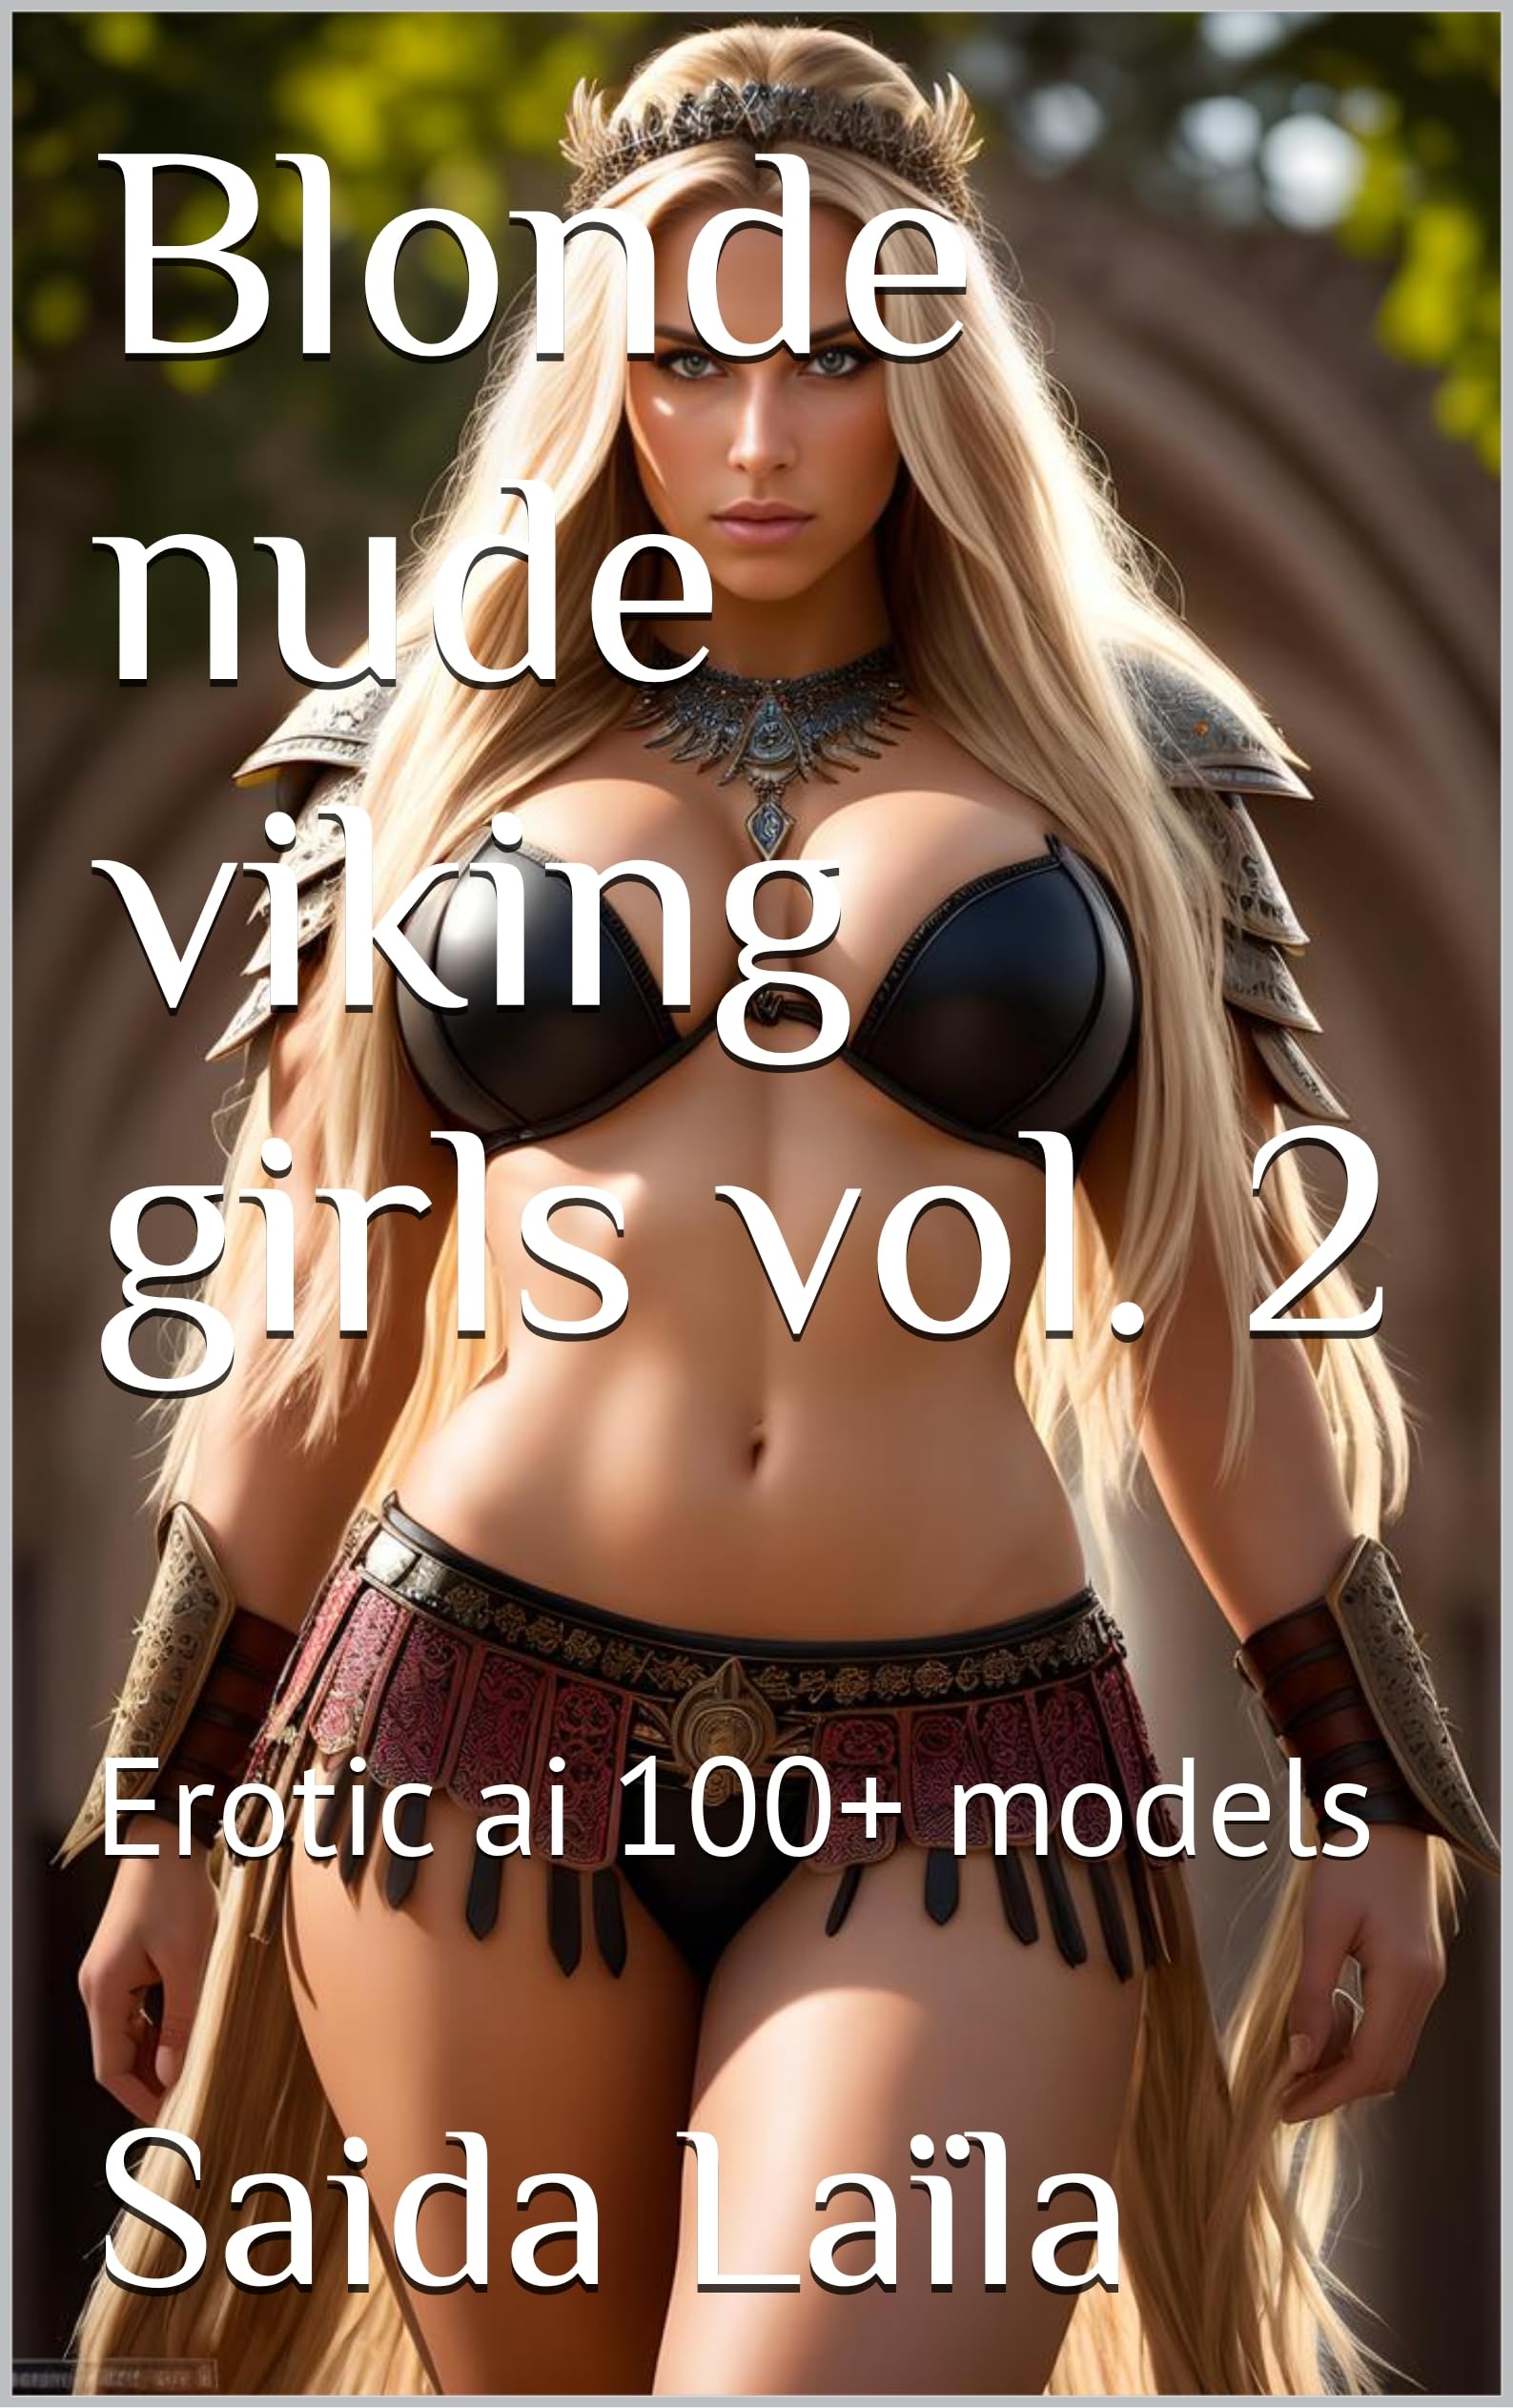 aimee goodfellow recommends nude viking girl pic